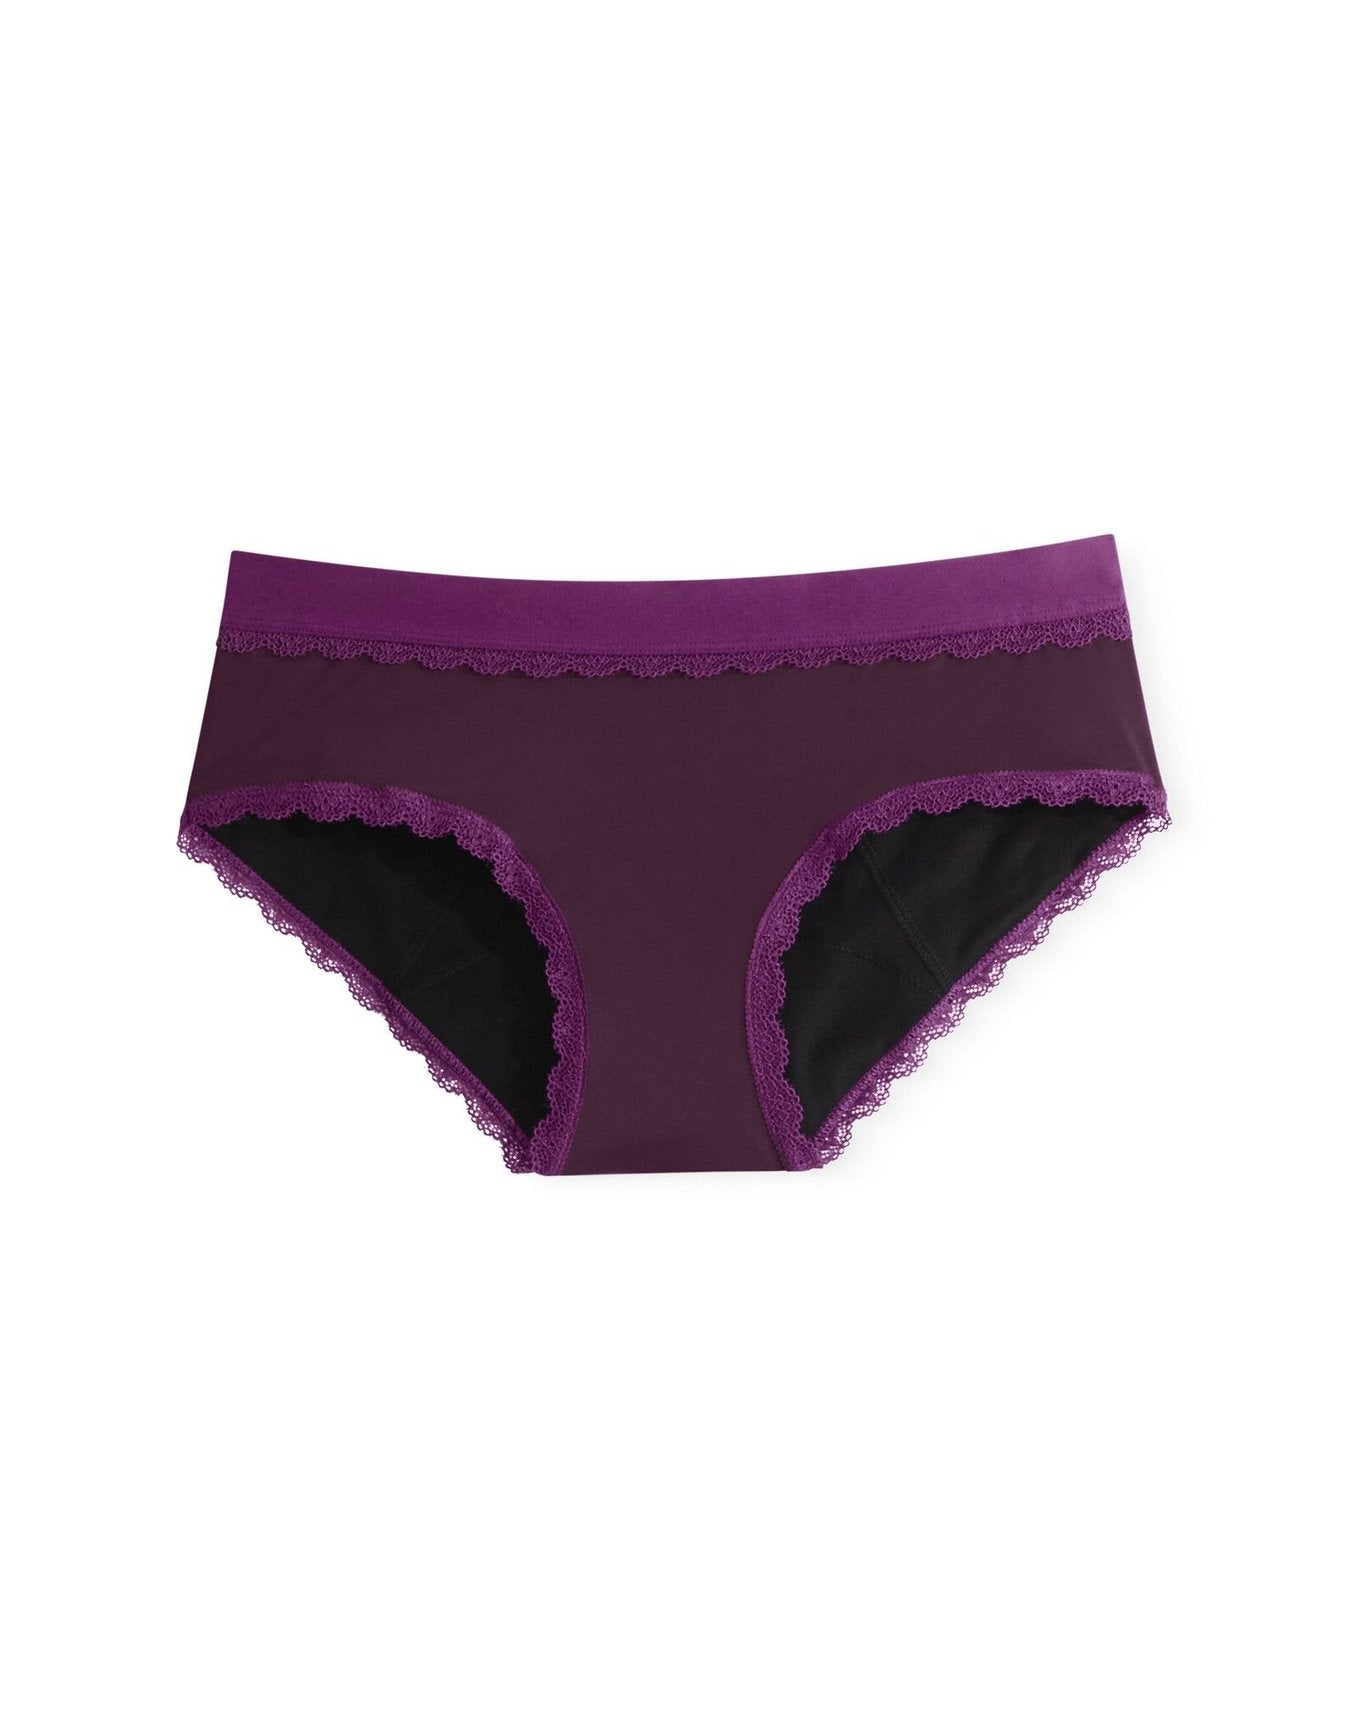 Joyja Olivia period-proof panty in color Potent Purple and shape hipster